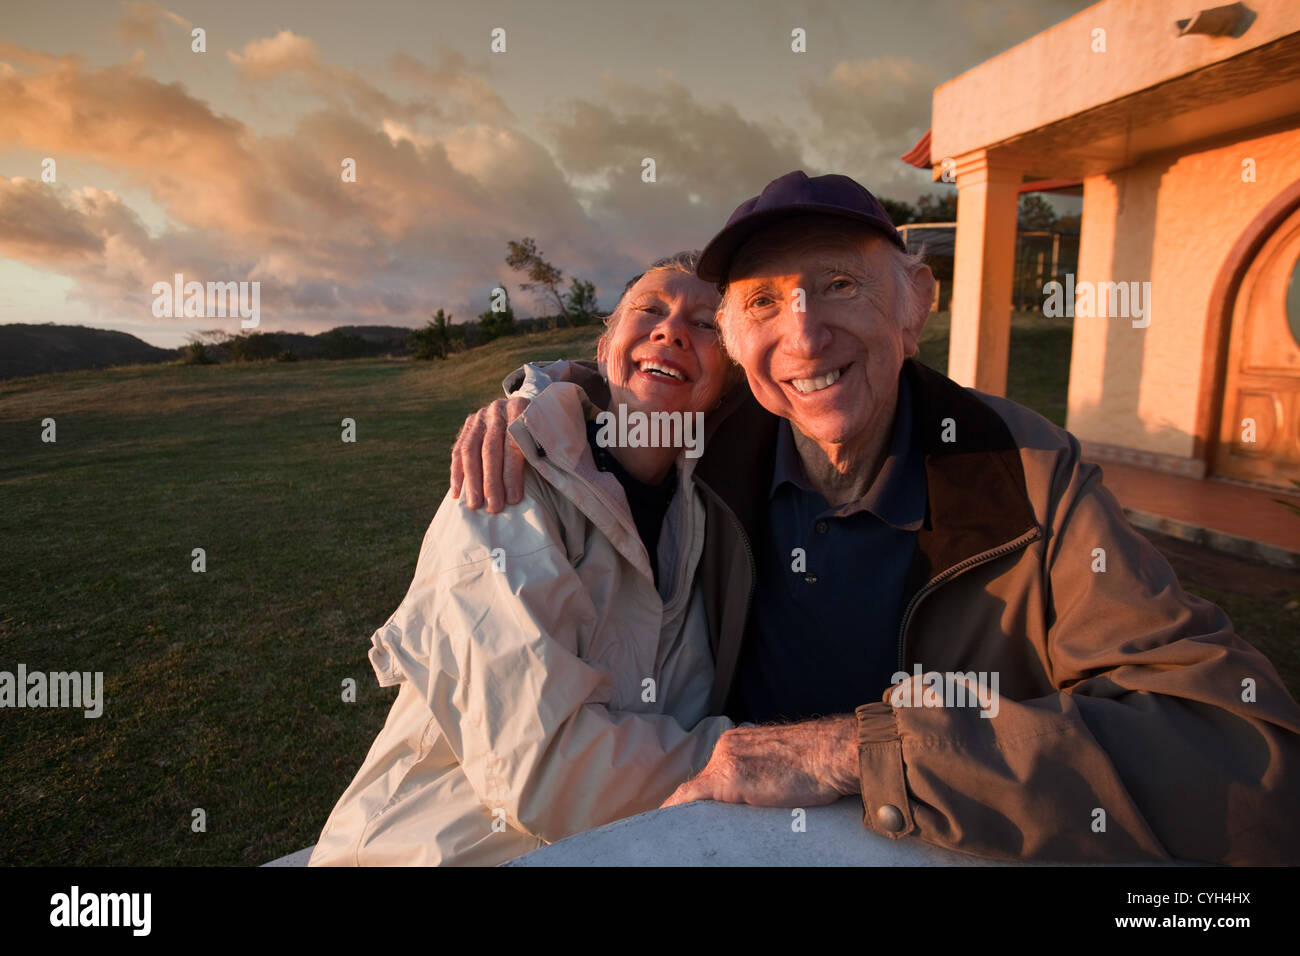 Loving elderly couple smiling at table in mountains Stock Photo